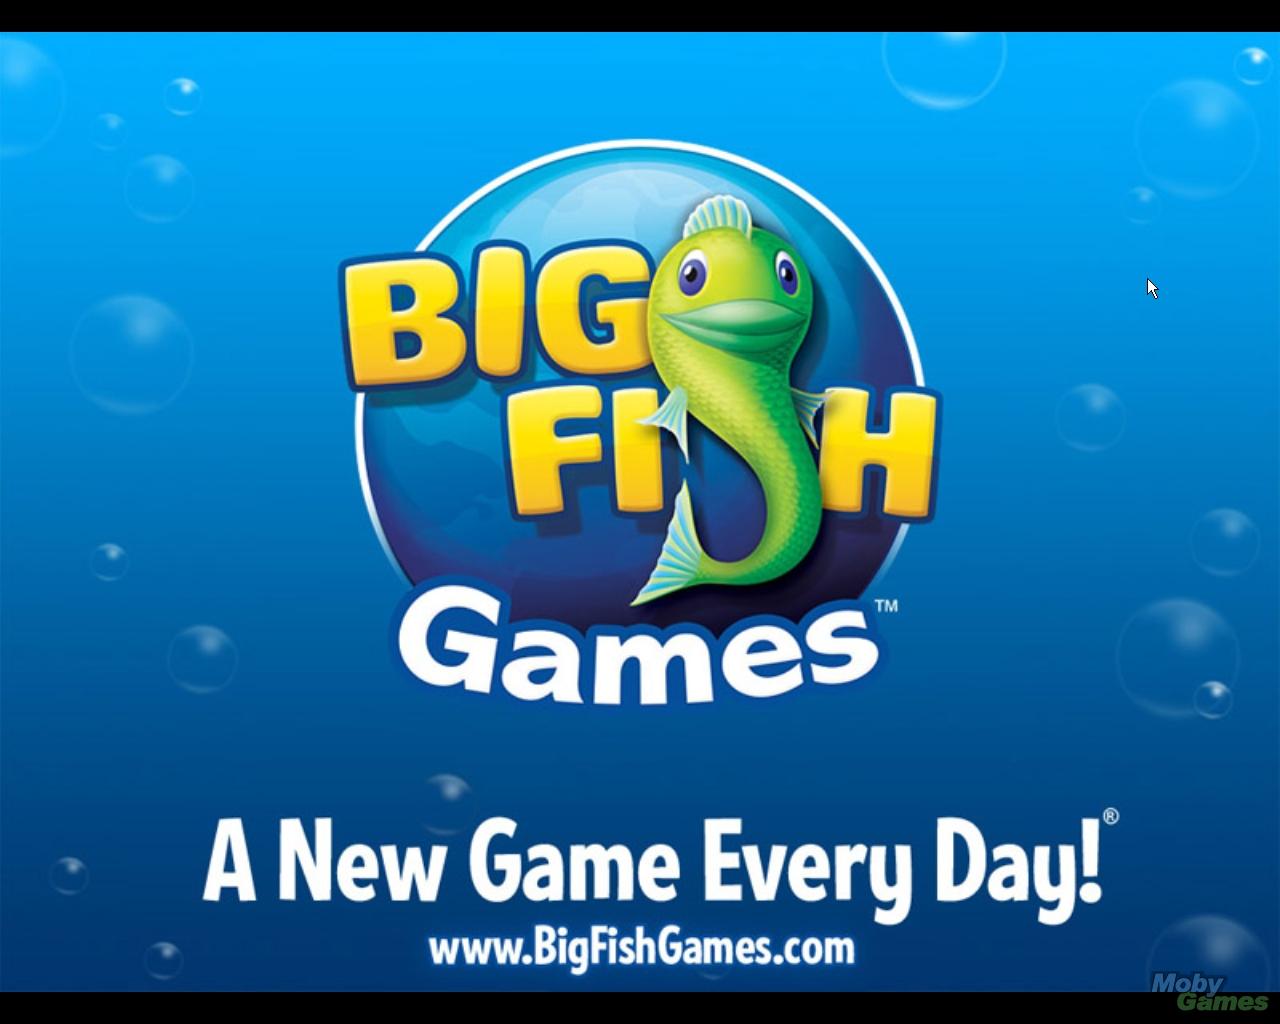 Games publisher Big Fish begin cuts – Cork office on notice to close